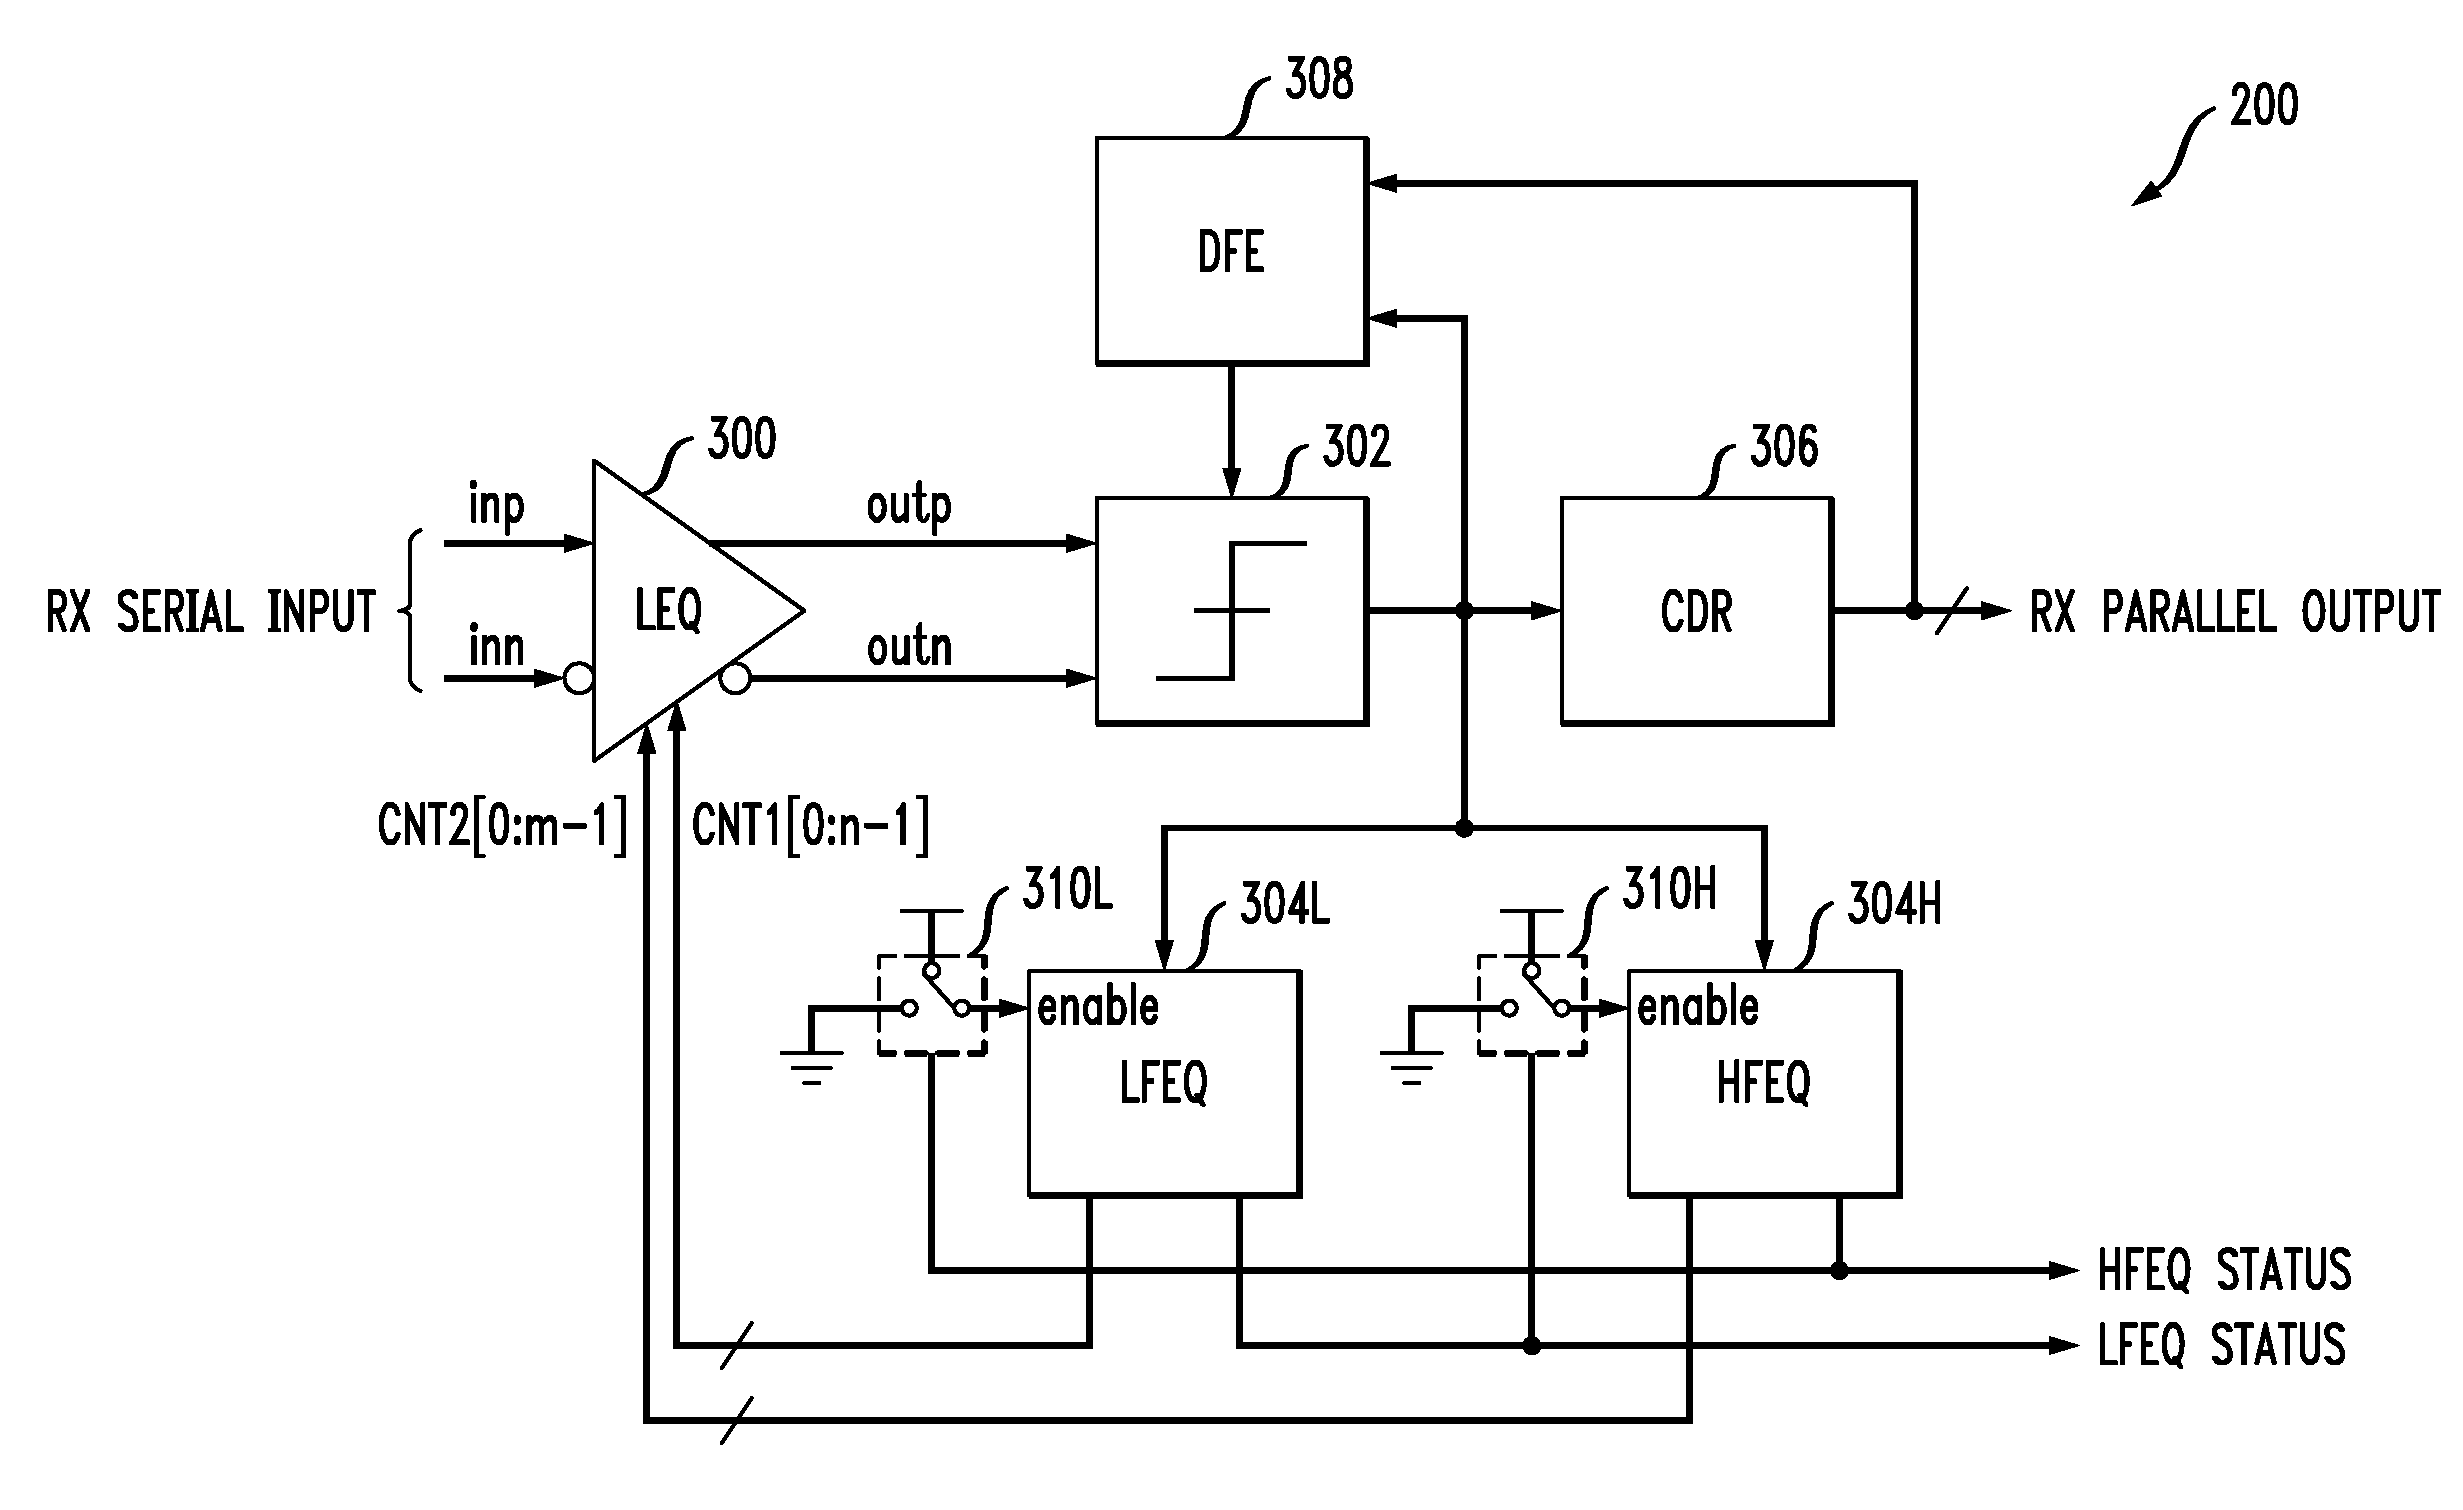 Multi-Band Gain Adaptation for Receiver Equalization Using Approximate Frequency Separation